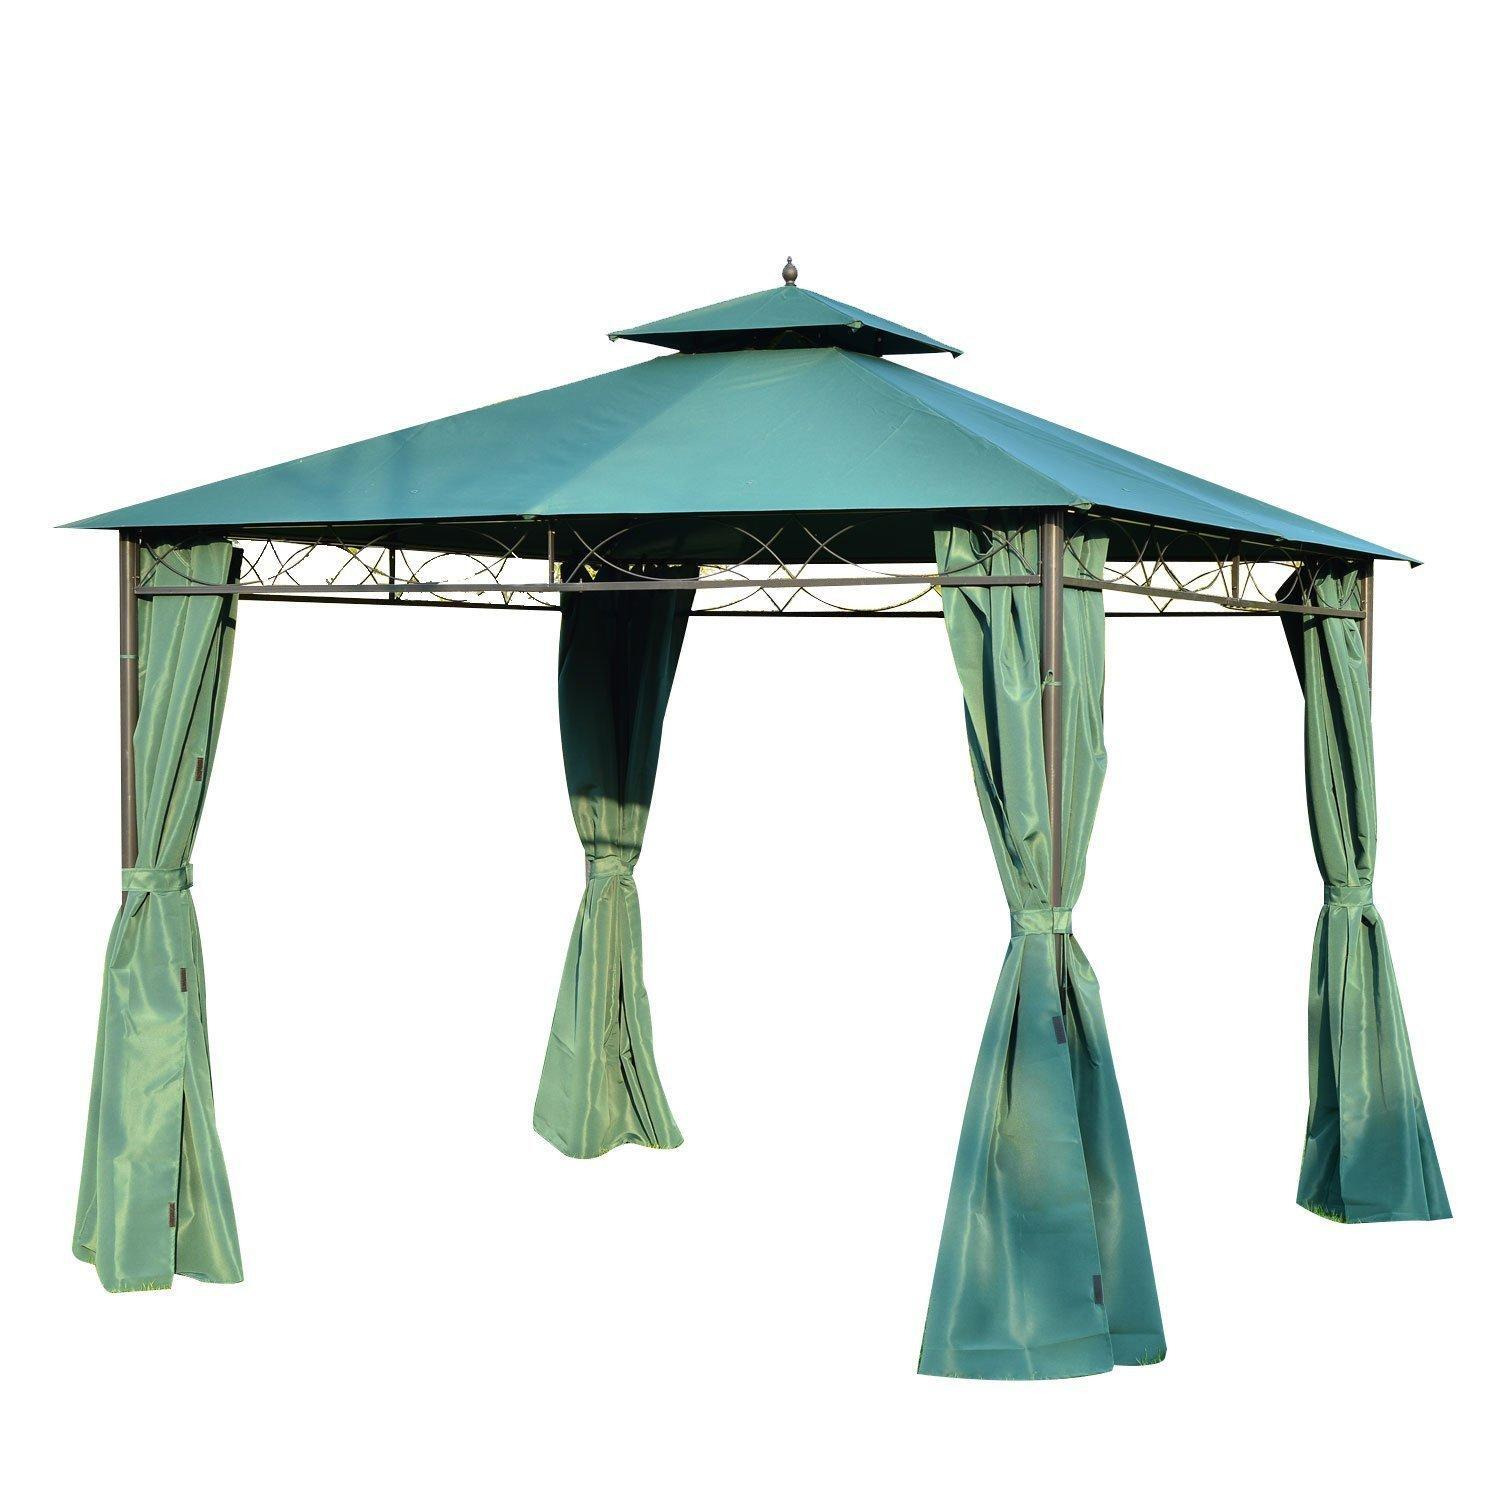 3 x 3m Metal Garden Gazebo Marquee Party Tent Canopy Pavilion Sidewall - image 1